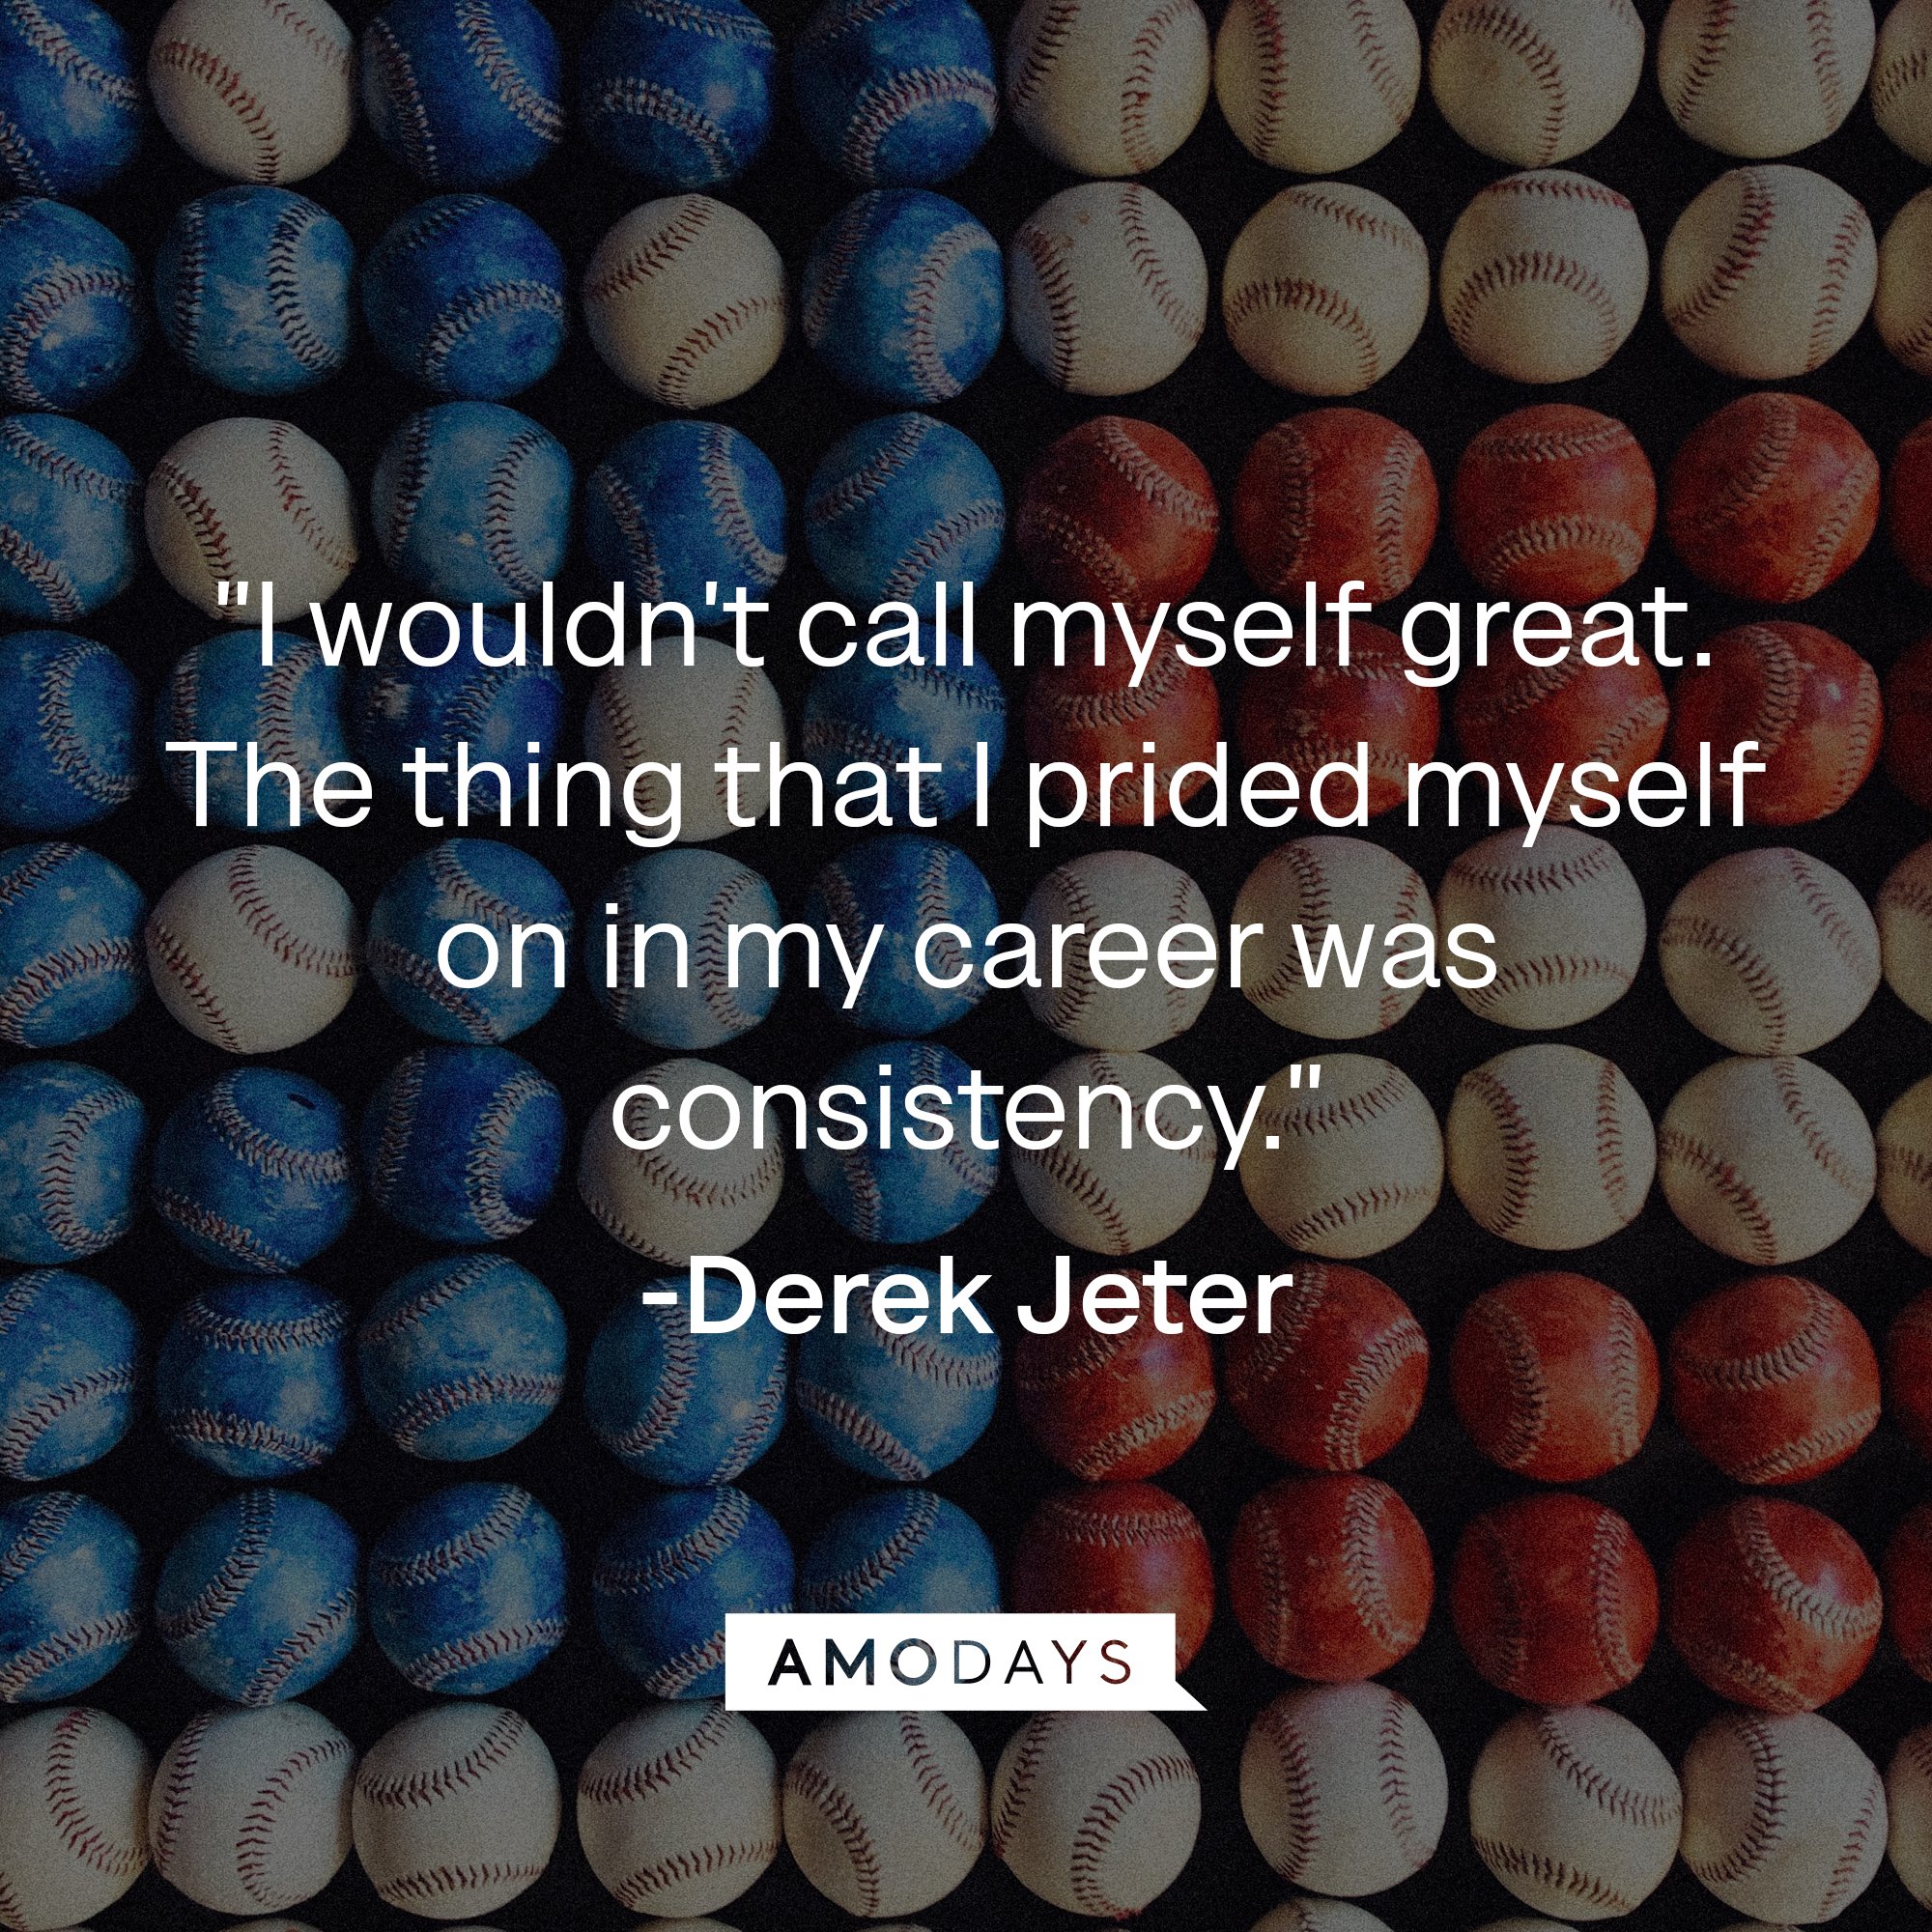 Derek Jeter's quote: "I wouldn't call myself great. The thing that I prided myself on in my career was consistency." | Image: AmoDays